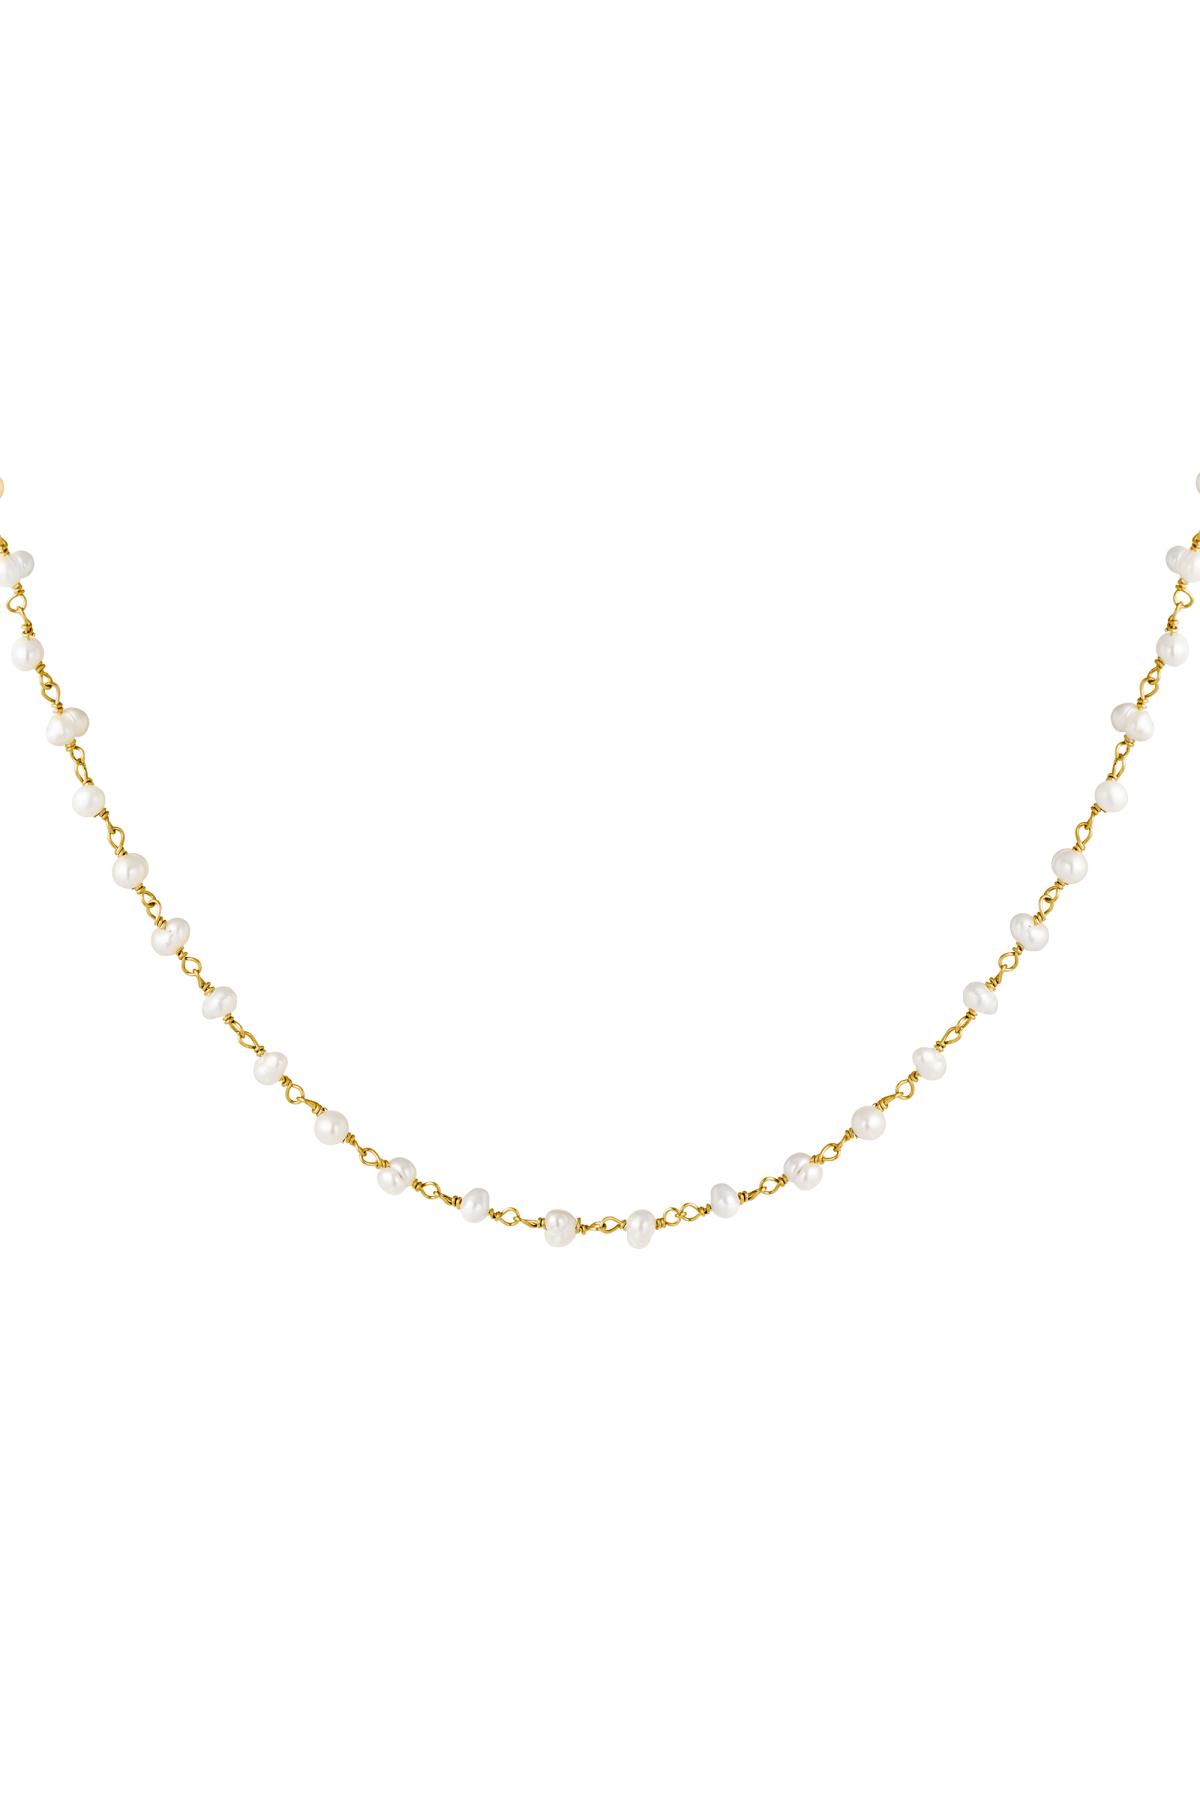 Necklace Chain of Pearls Gold Gold Plated h5 